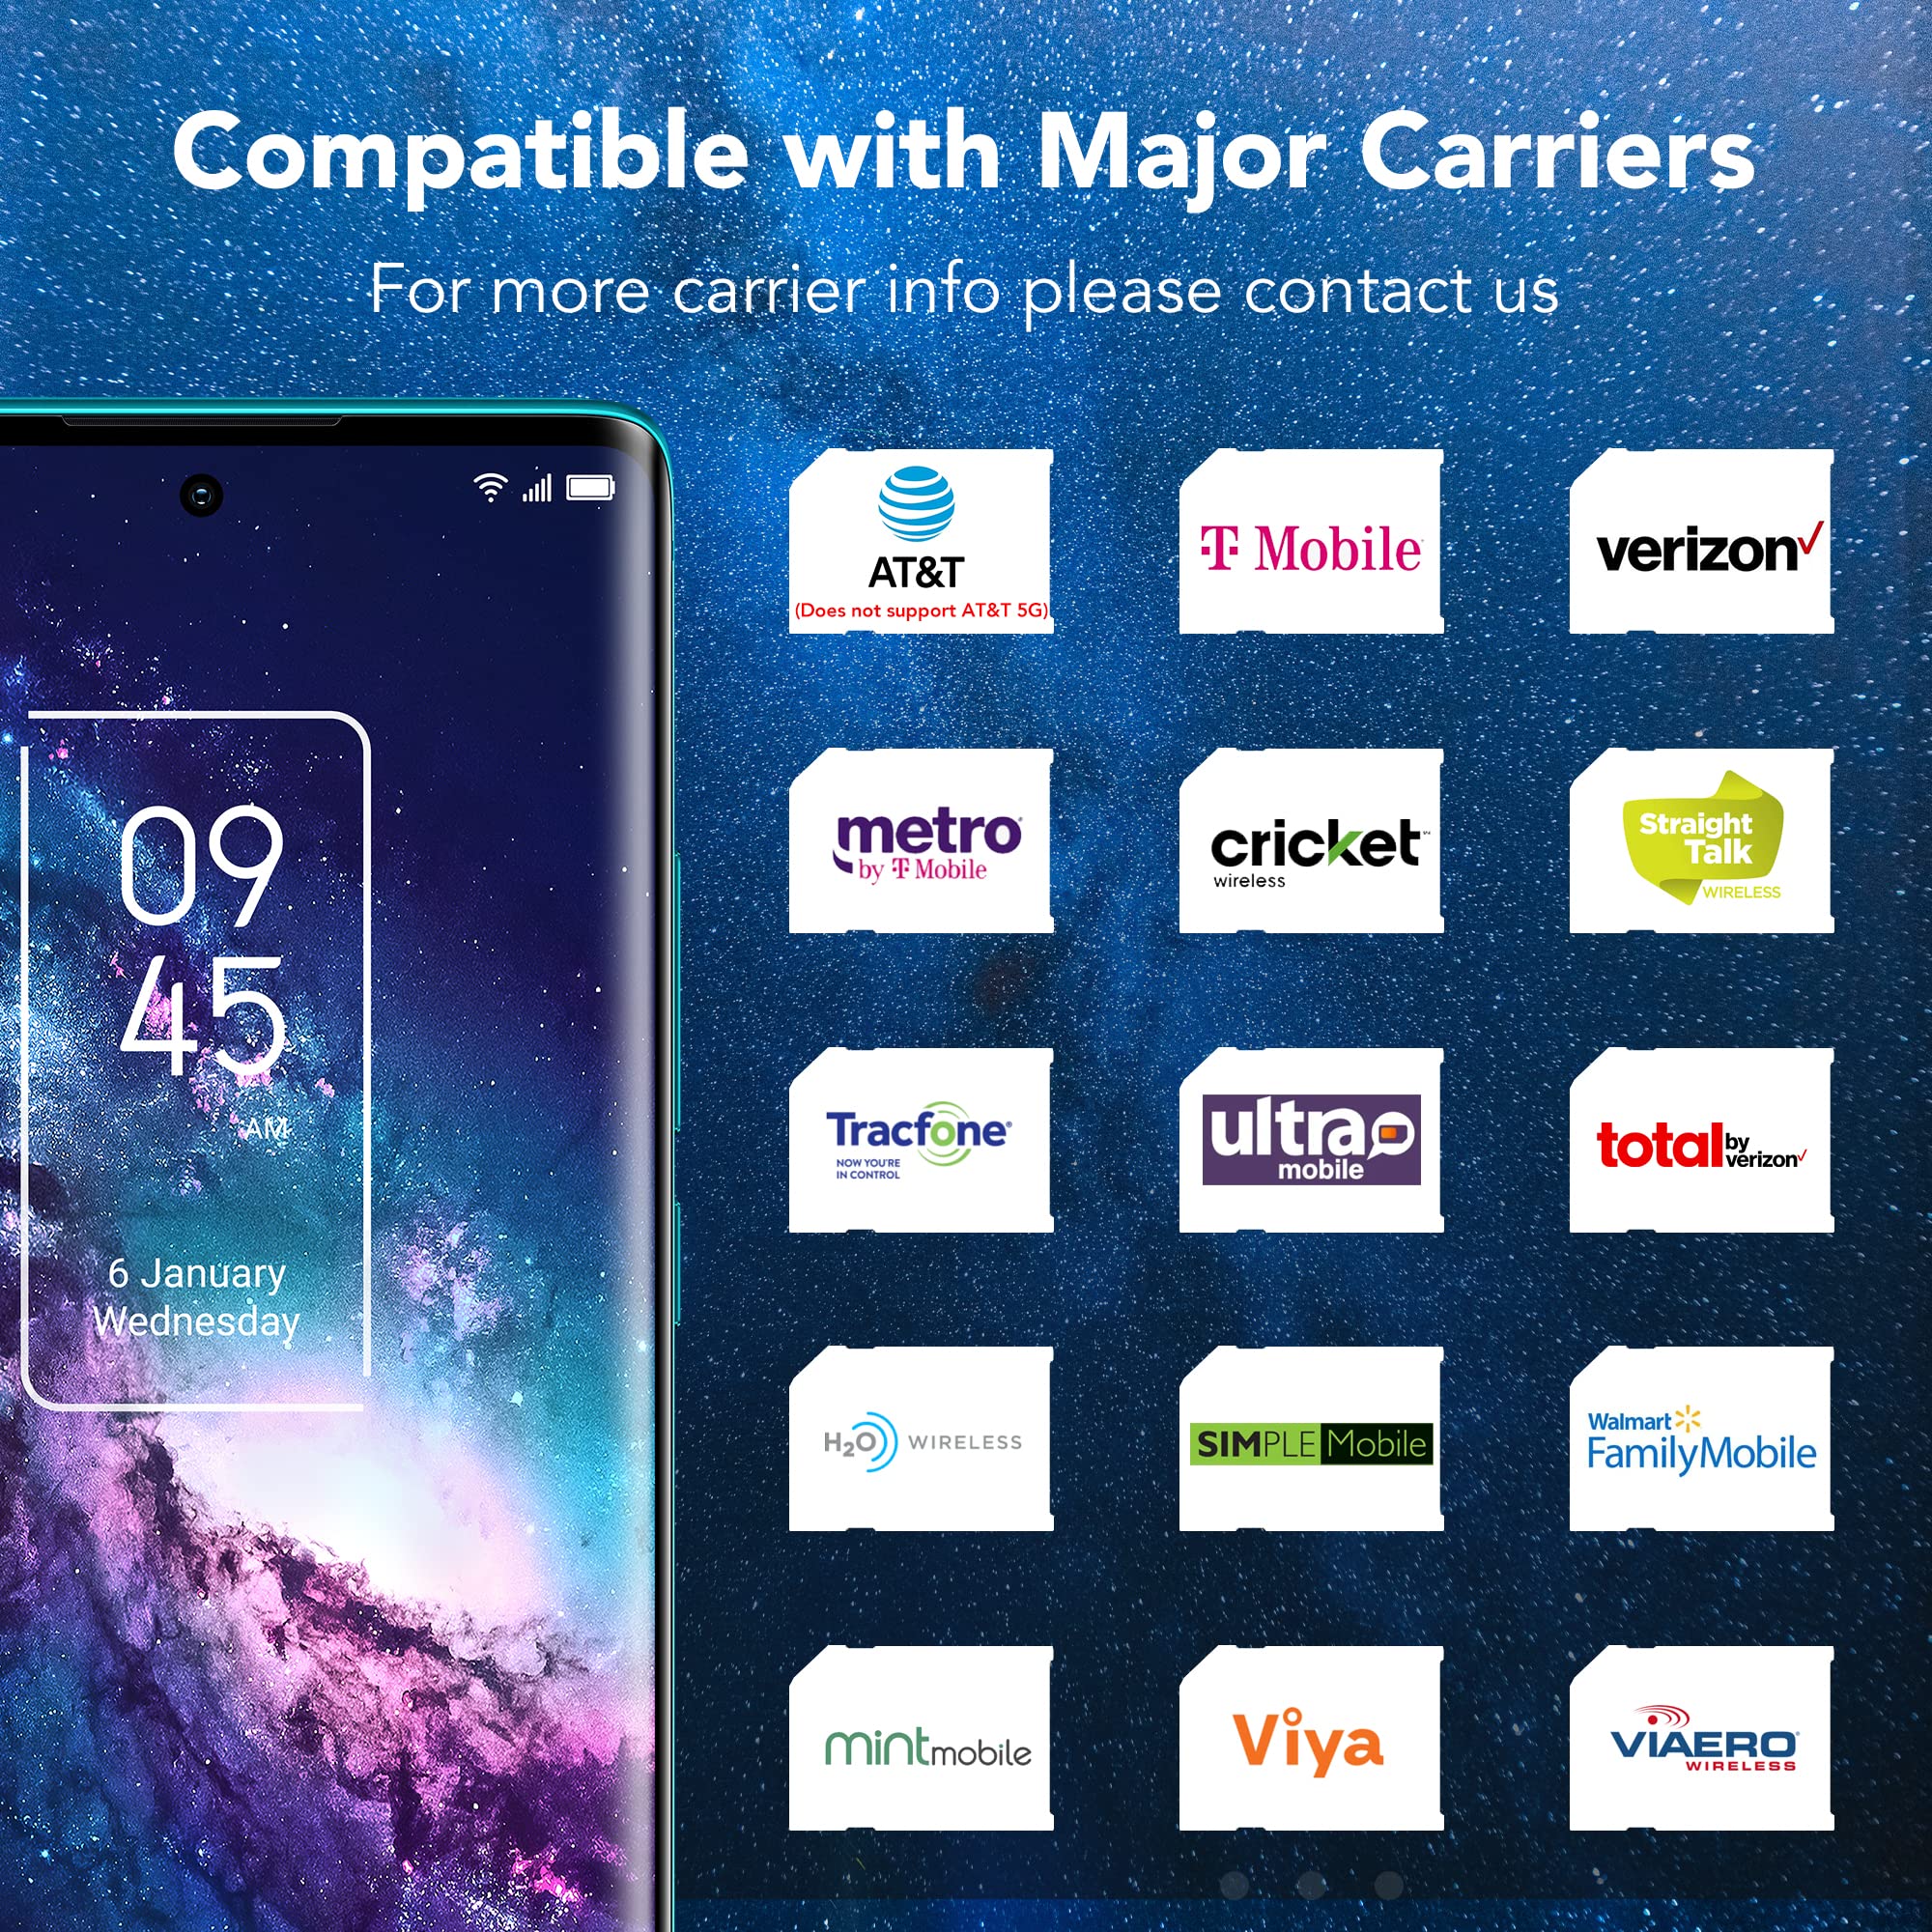 TCL 20 Pro 5G Unlocked Smartphone with 6.67 inch AMOLED FHD+ Display, 48MP OIS Quad Camera, 6GB+256GB, 4500mAh Battery, US 5G Verizon Cellphone, Marine Blue, Does not Support AT&T 5G